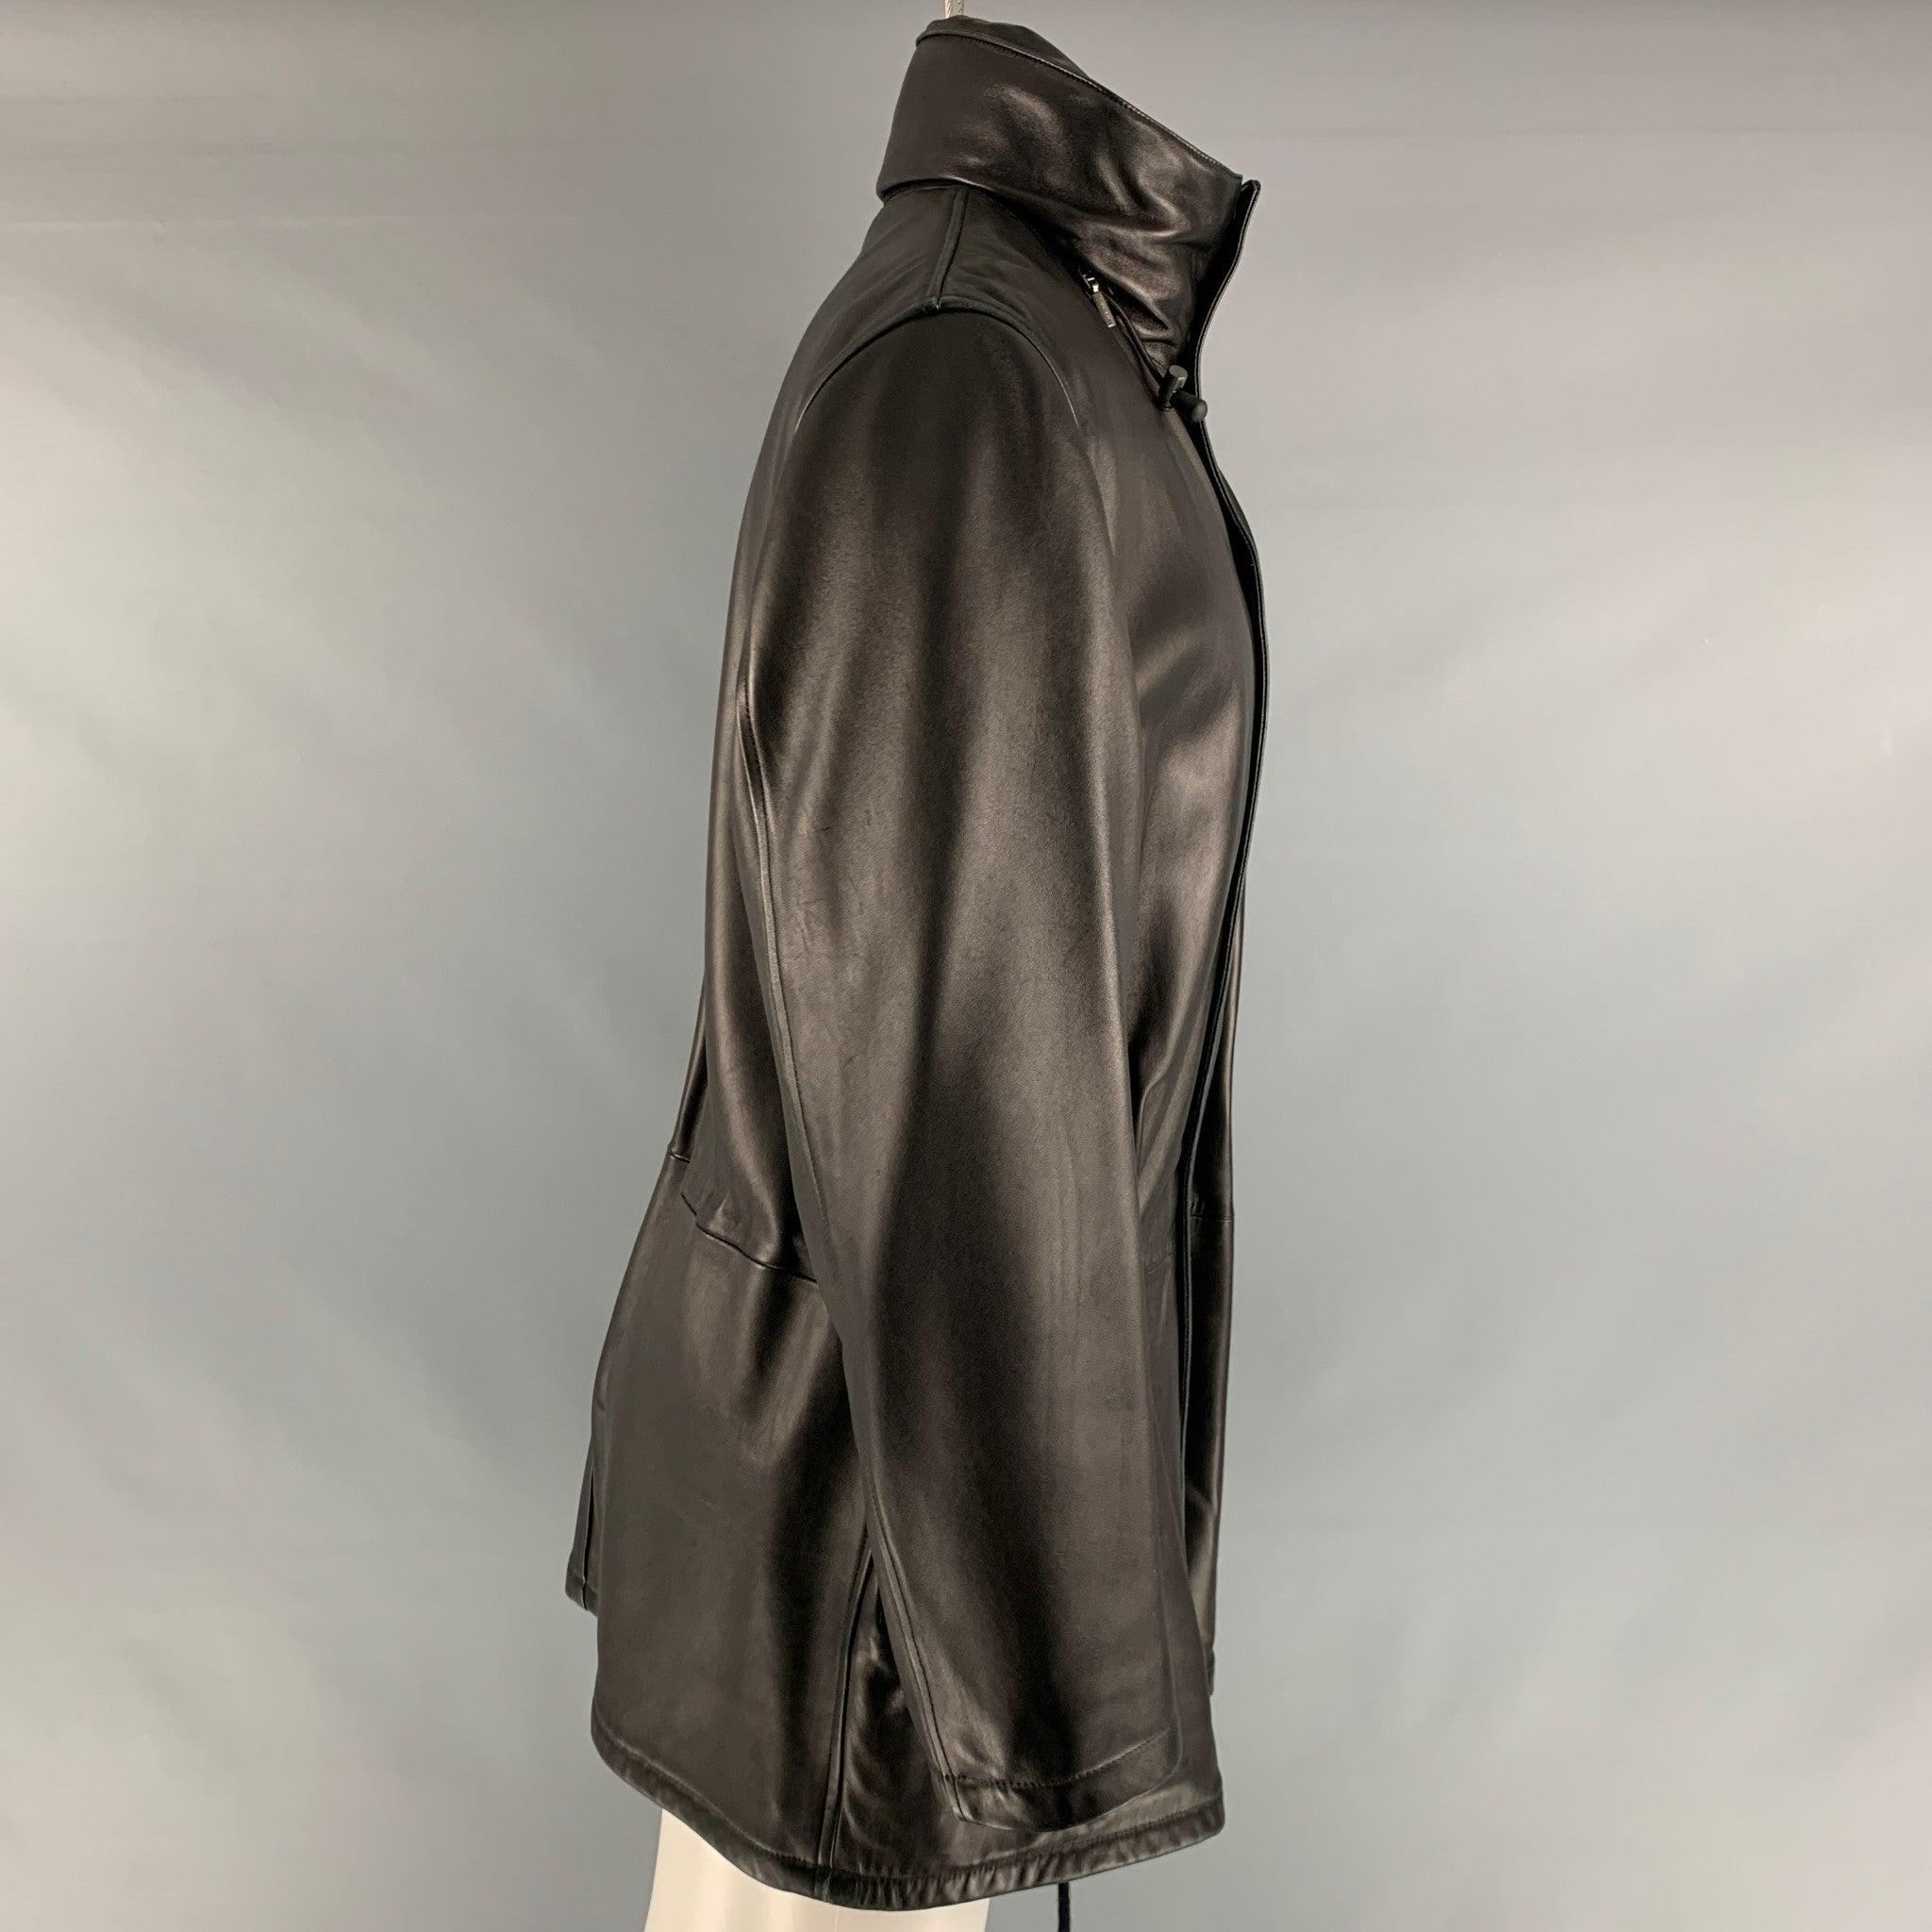 ARMANI COLLEZIONI oversized parka jacket comes in a black lamb skin nappa leather featuring a high neck, hidden hood, front pockets, drawstring details, and a hidden snap button closure. Made in Italy. Very Good Pre-Owned Condition. Minor signs of